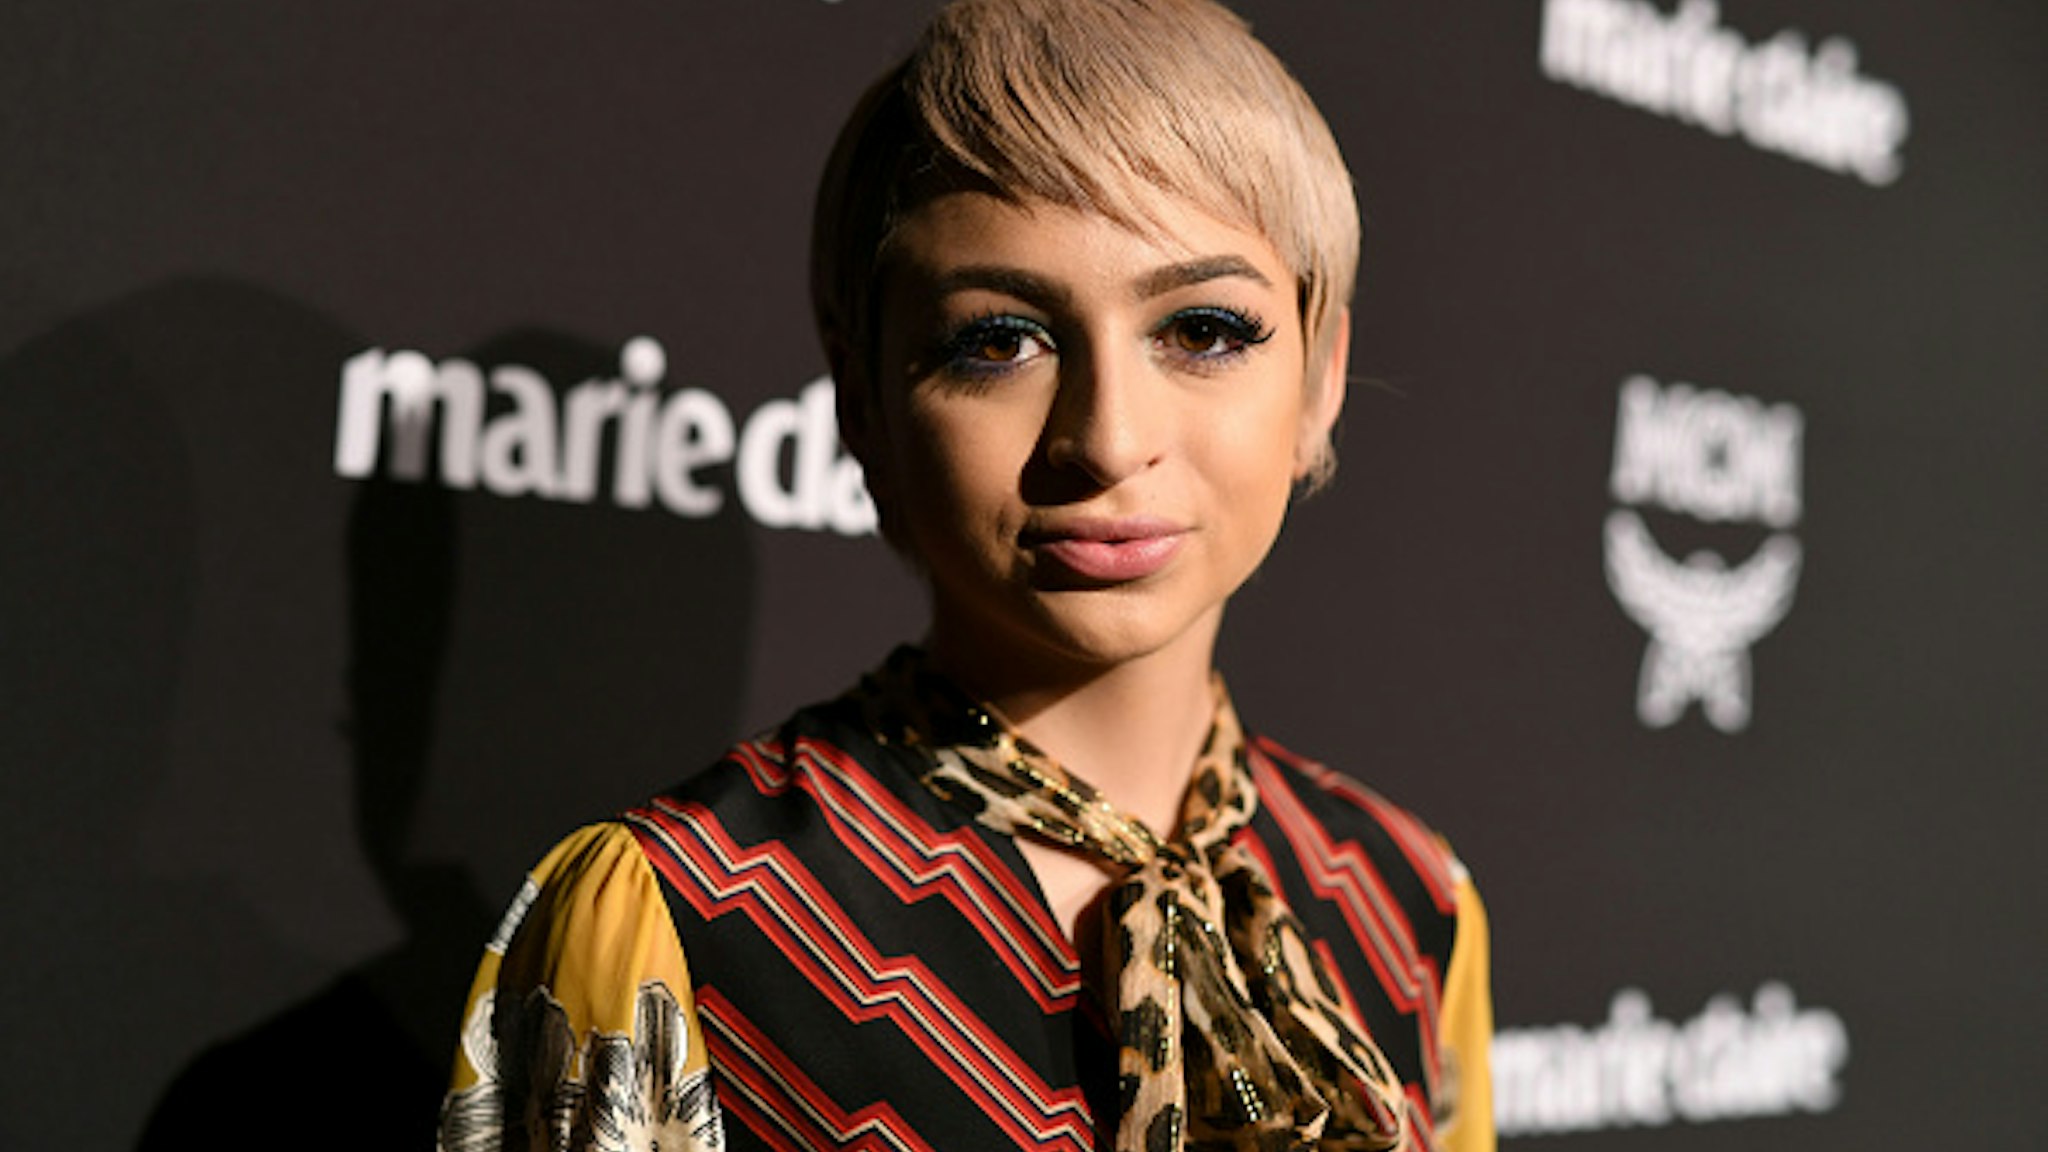 LOS ANGELES, CA - MARCH 12: Josie Jay Totah is seen as Marie Claire honors Hollywood's Change Makers on March 12, 2019 in Los Angeles, California.